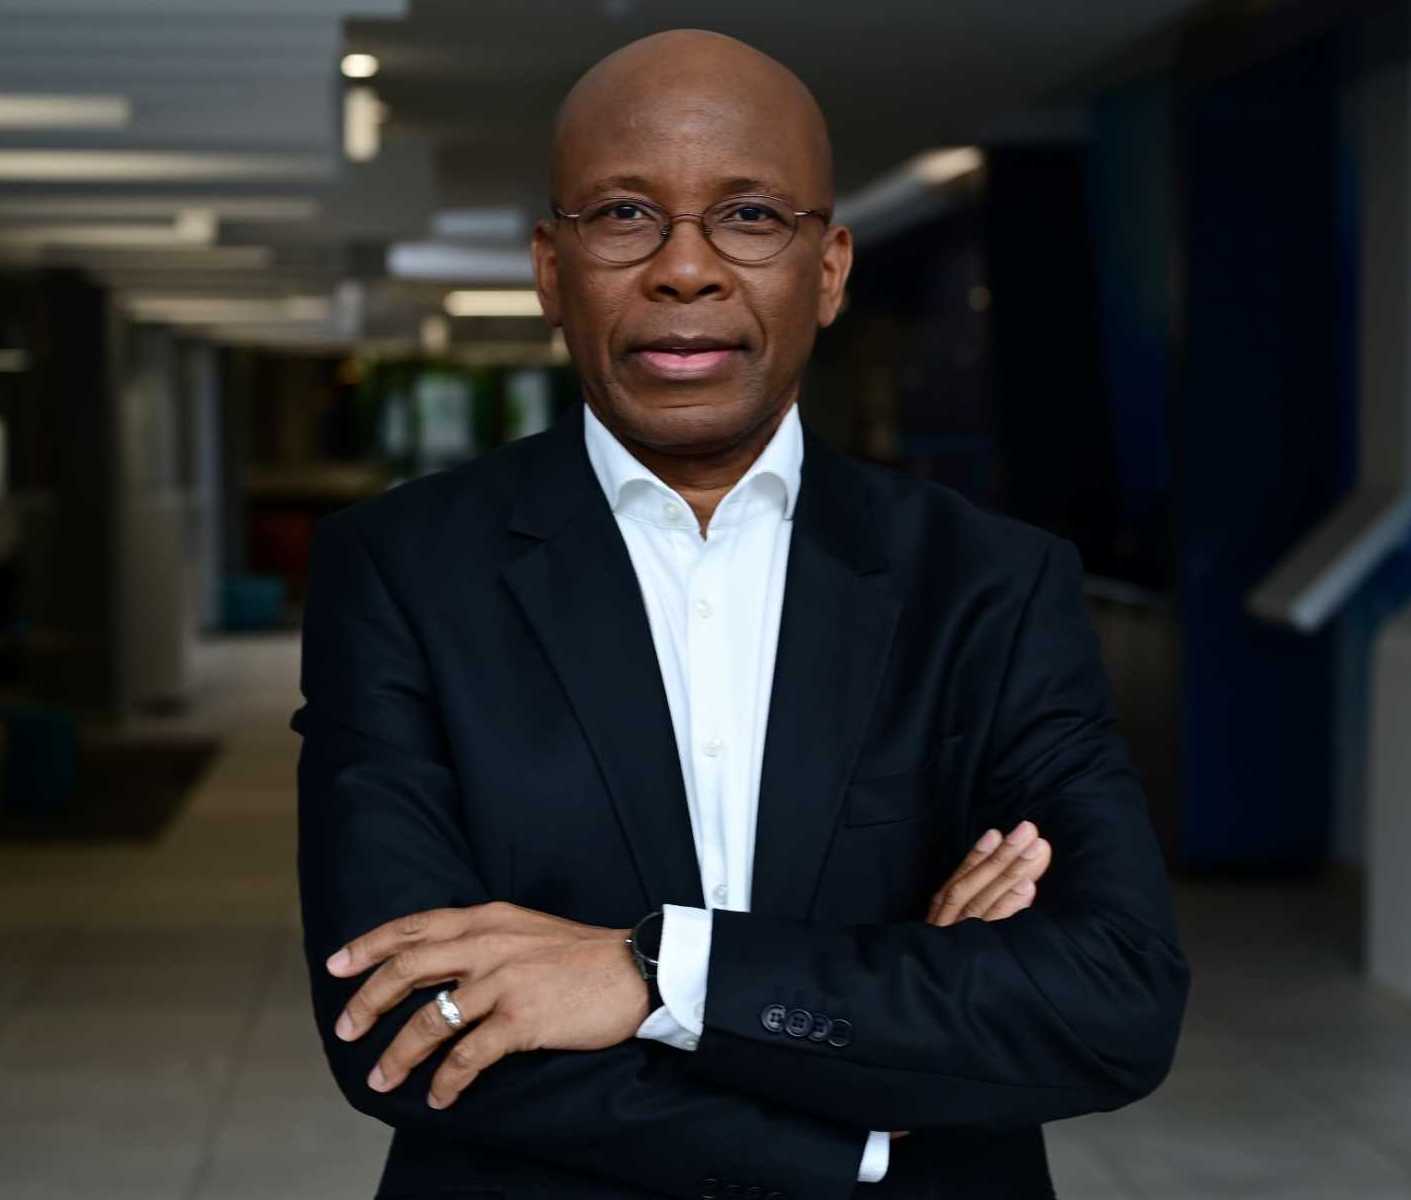 Mteto Nyati on his career in South Africa's technology industry